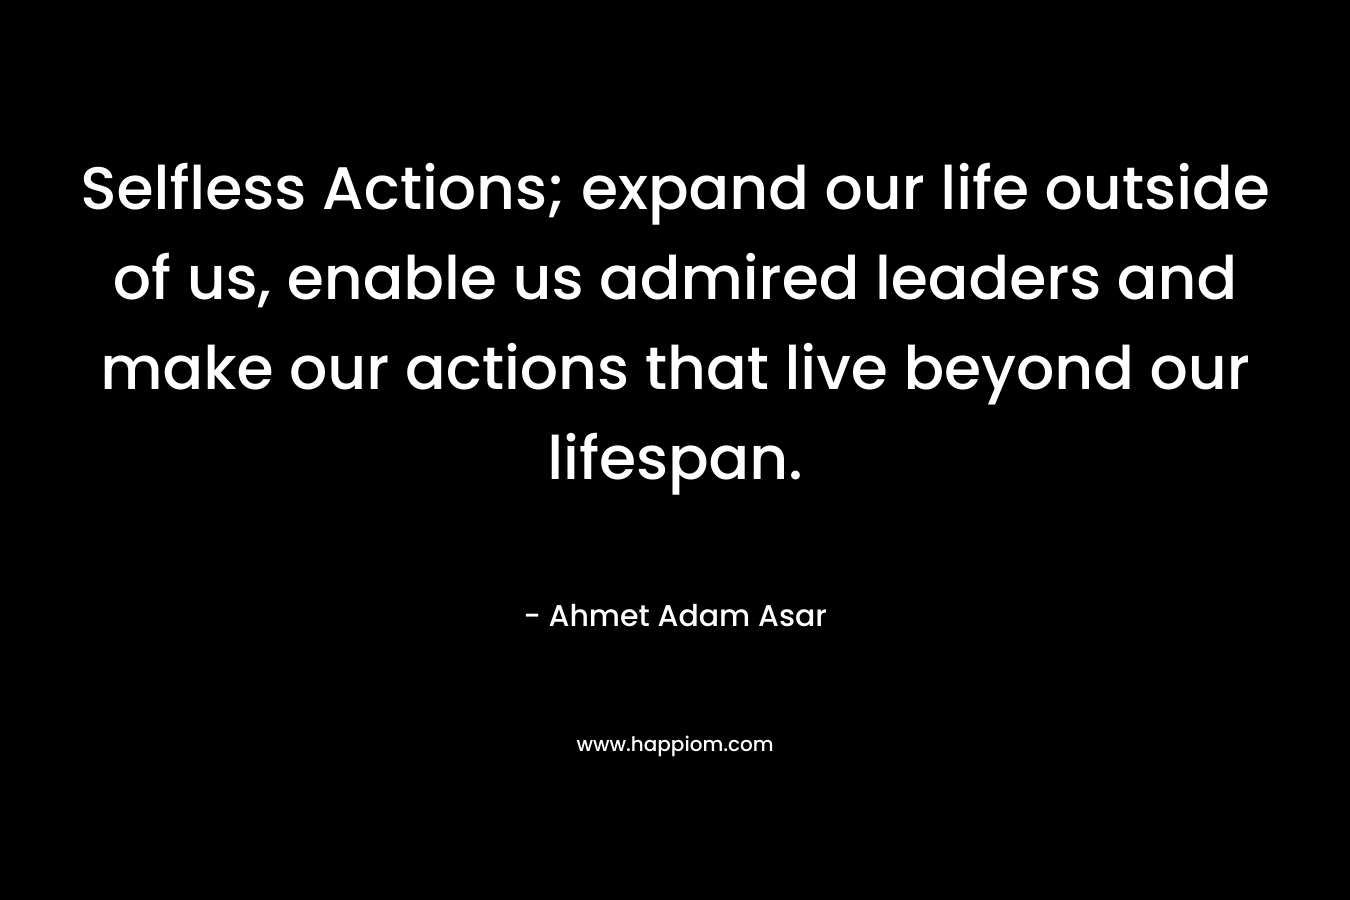 Selfless Actions; expand our life outside of us, enable us admired leaders and make our actions that live beyond our lifespan. – Ahmet Adam Asar